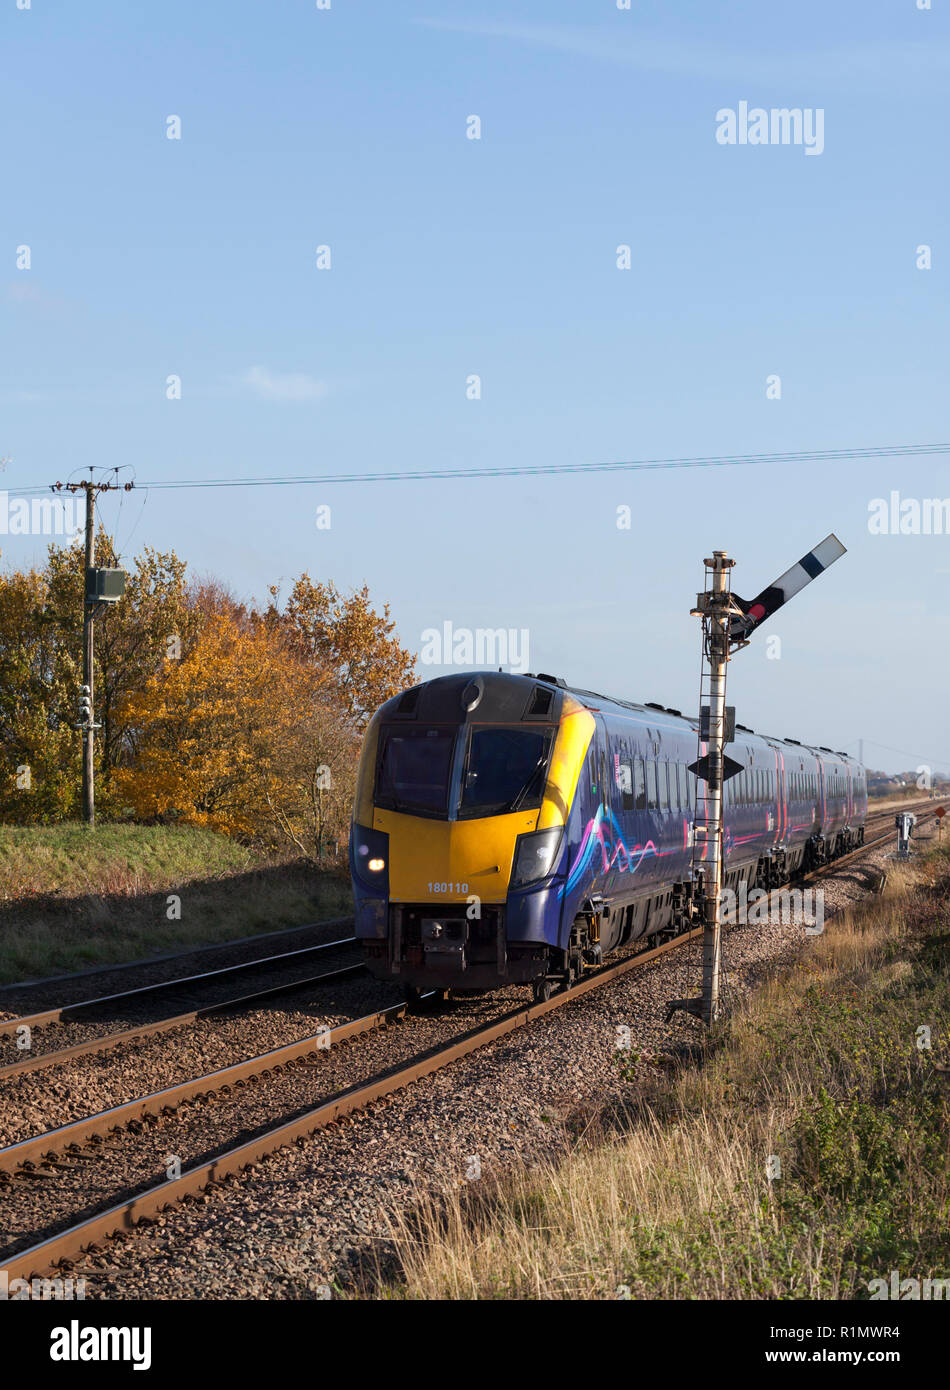 A First Hull Trains class 180 DMU train passing Crabley Creek on the line to Hull while running empty from Hull - Doncaster Stock Photo